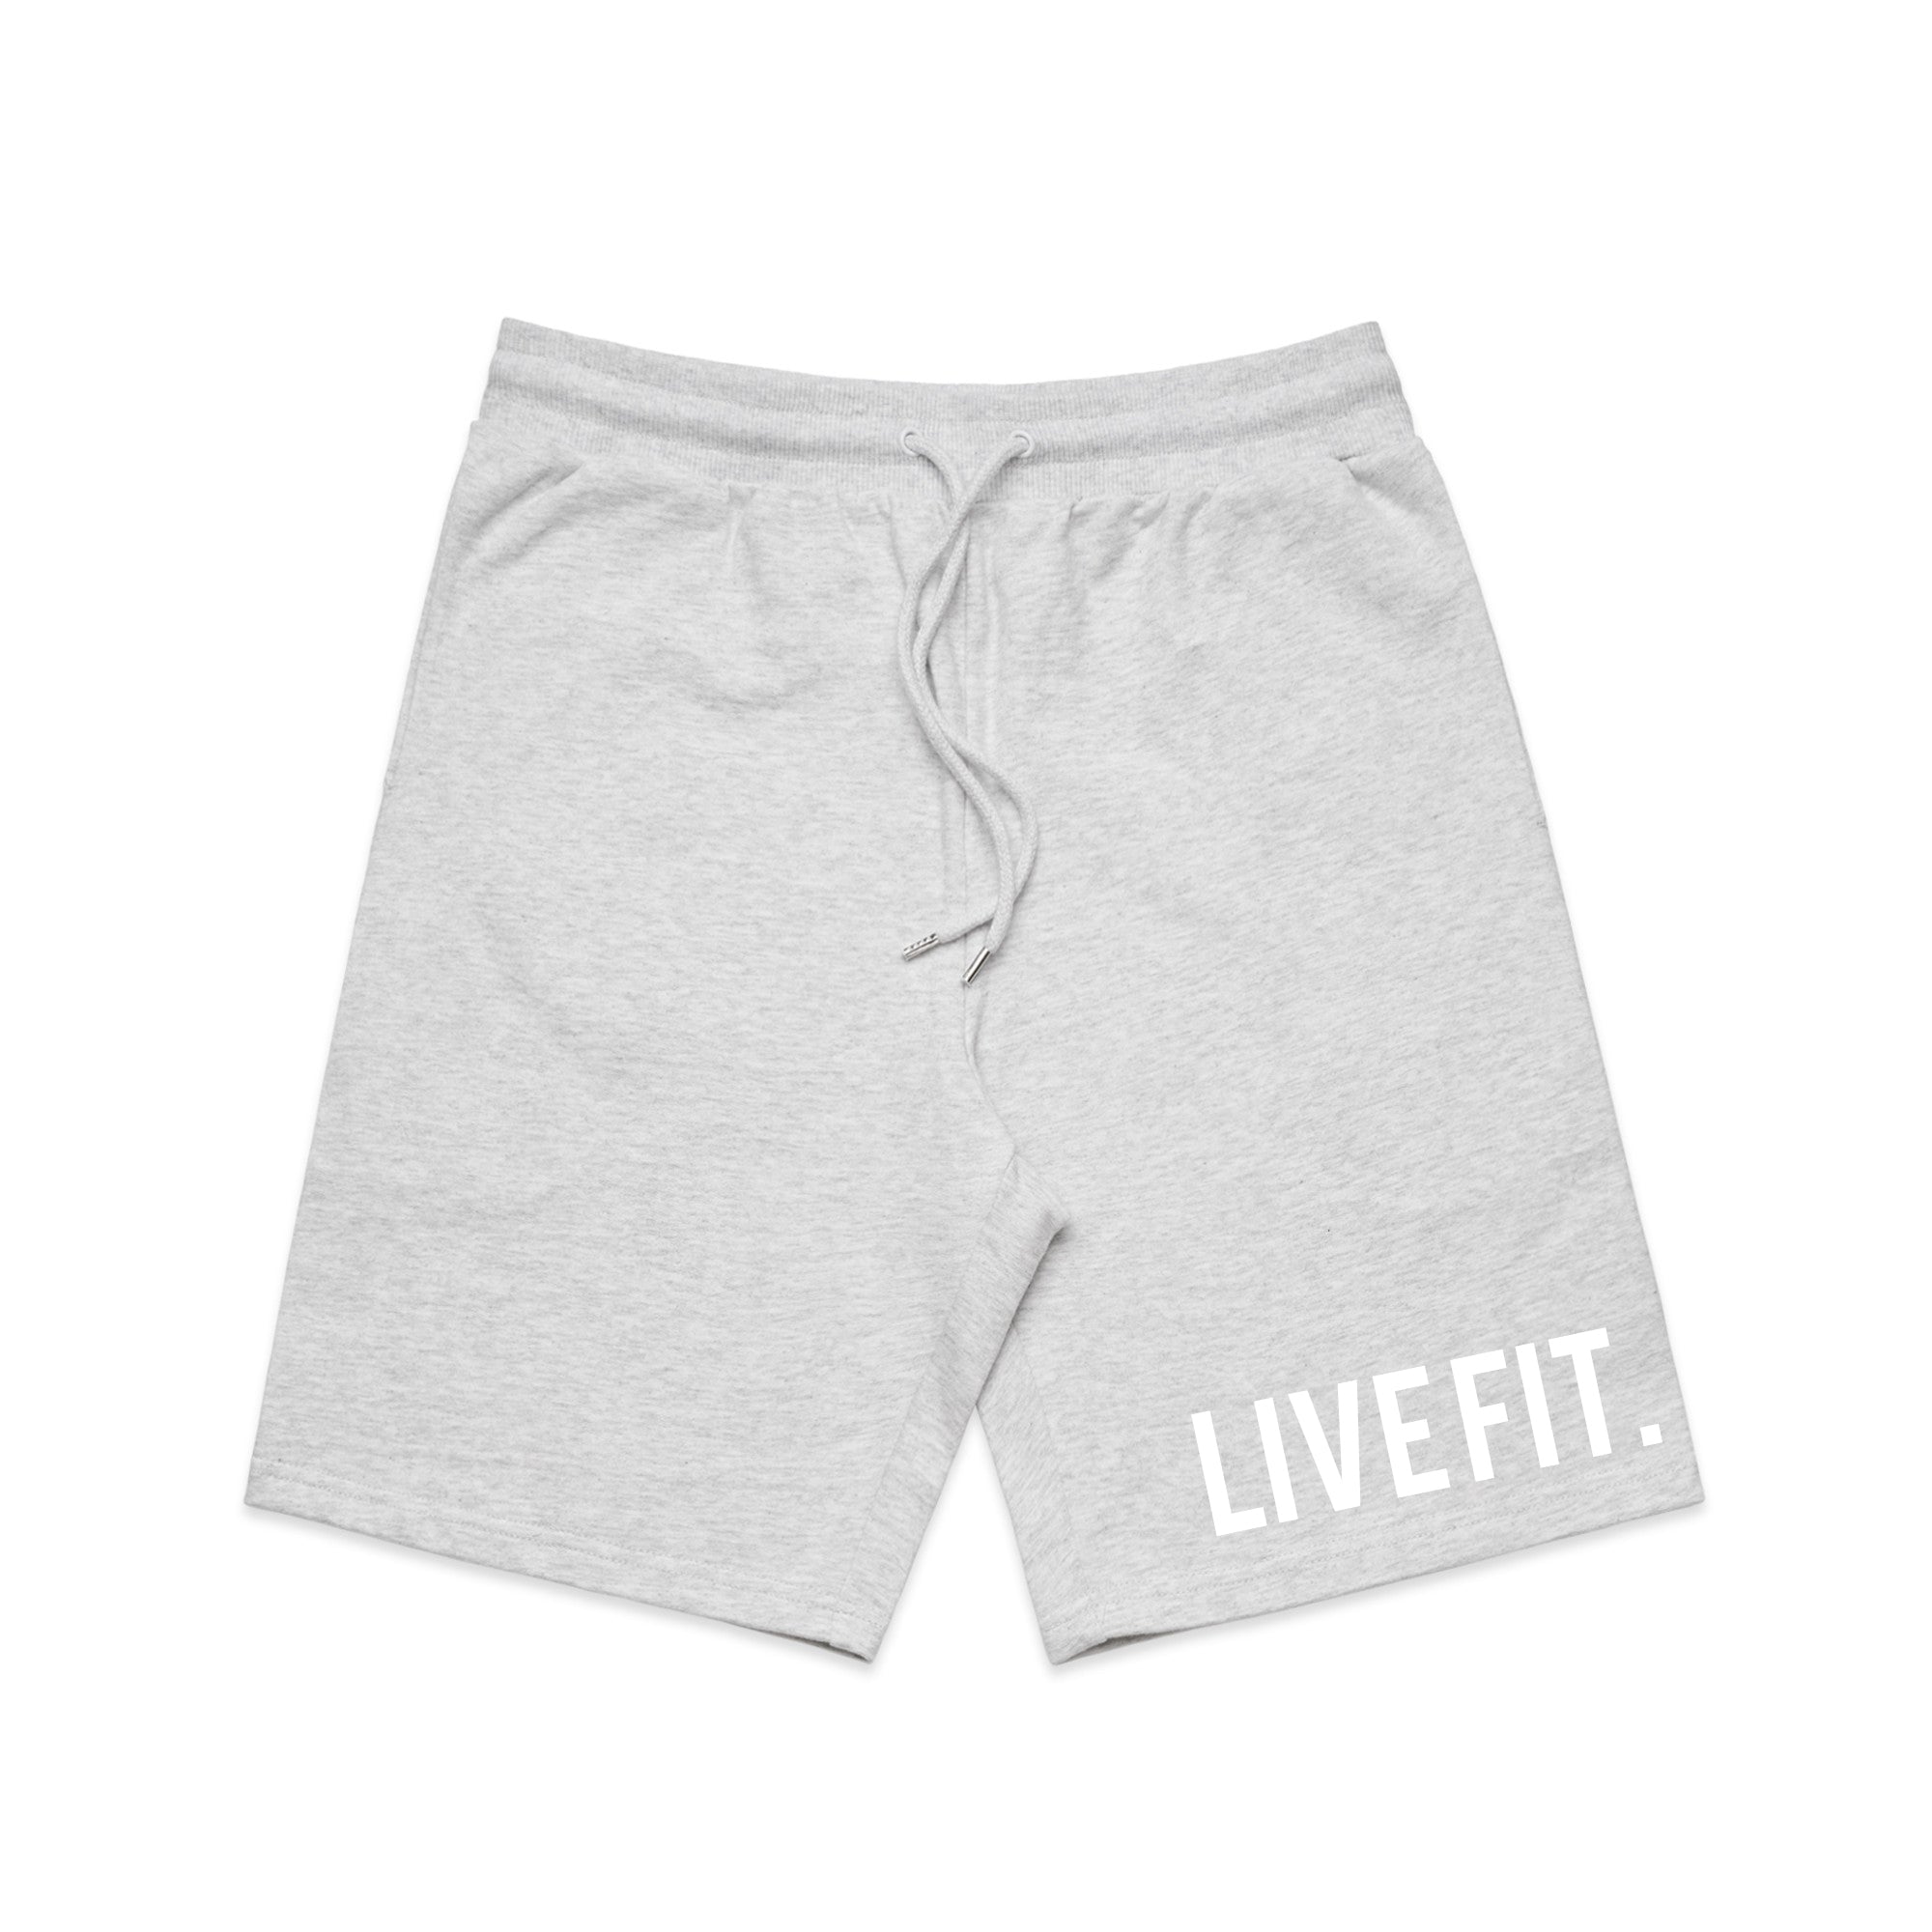 Seamless Athletic Shorts - Grey - Live Fit. Apparel